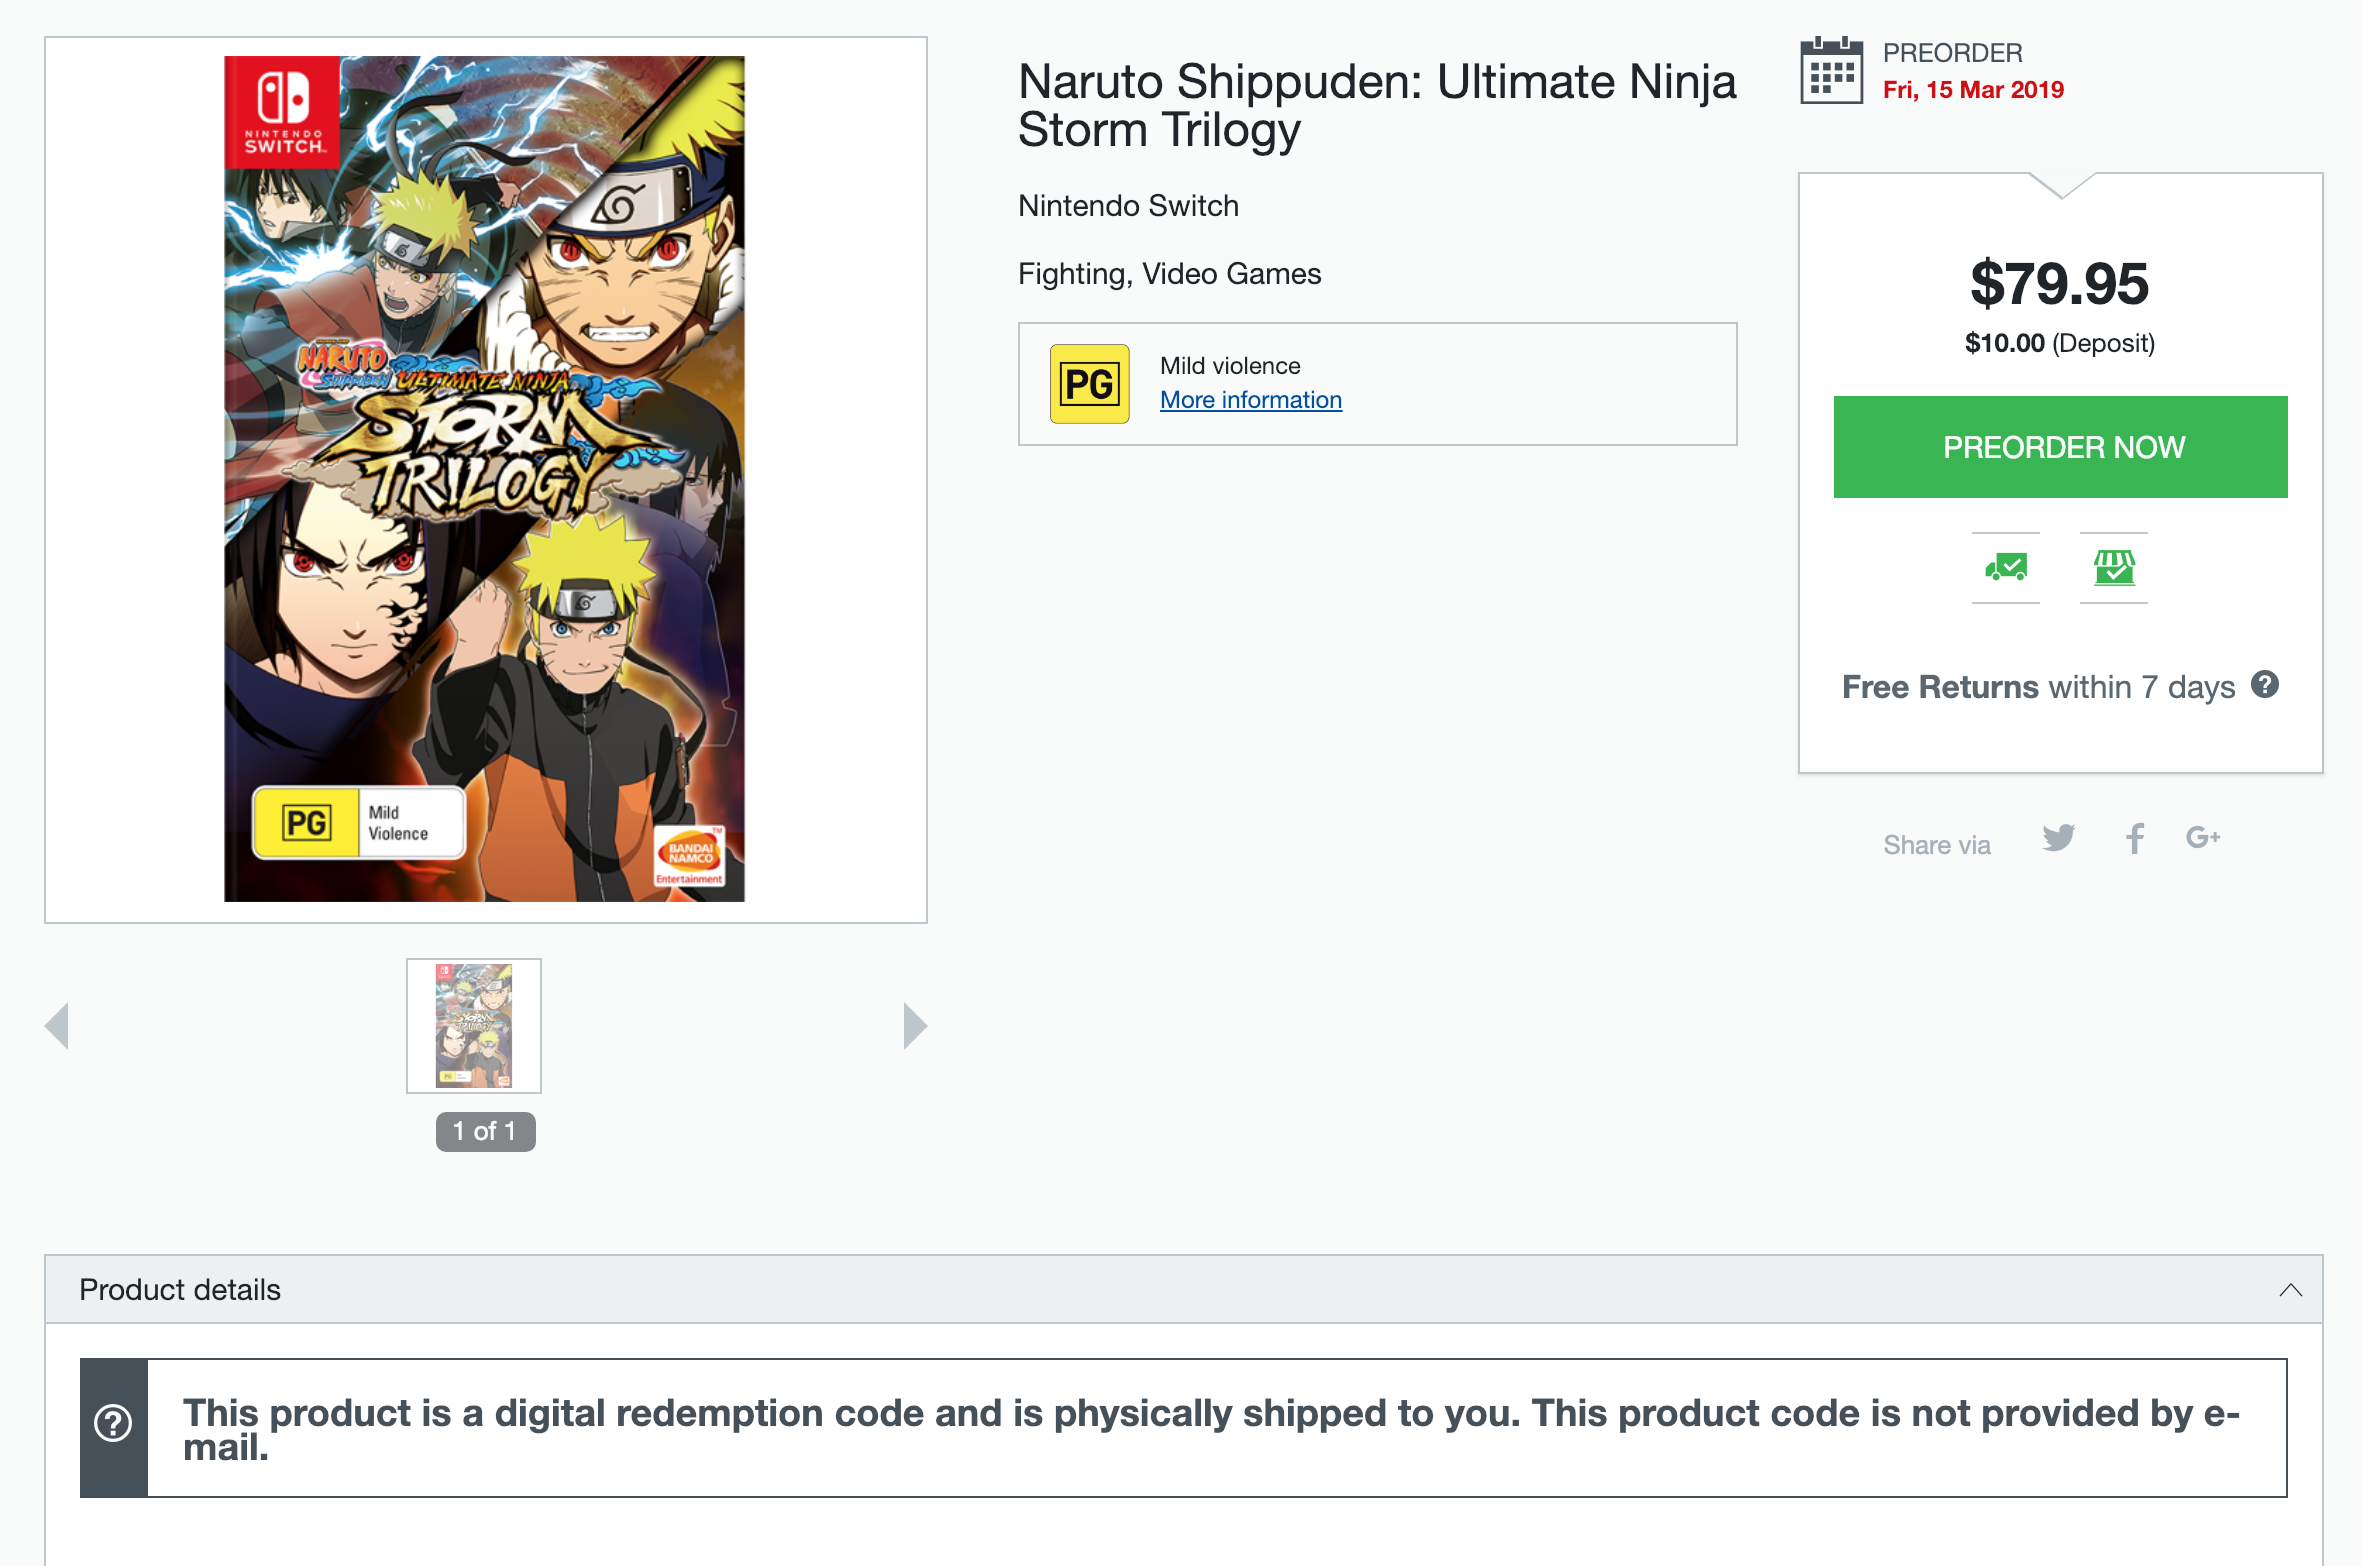 Naruto Shippuden: Australia In Three Ultimate Trilogy Storm Download Physical NintendoSoup Codes – Require Will Ninja